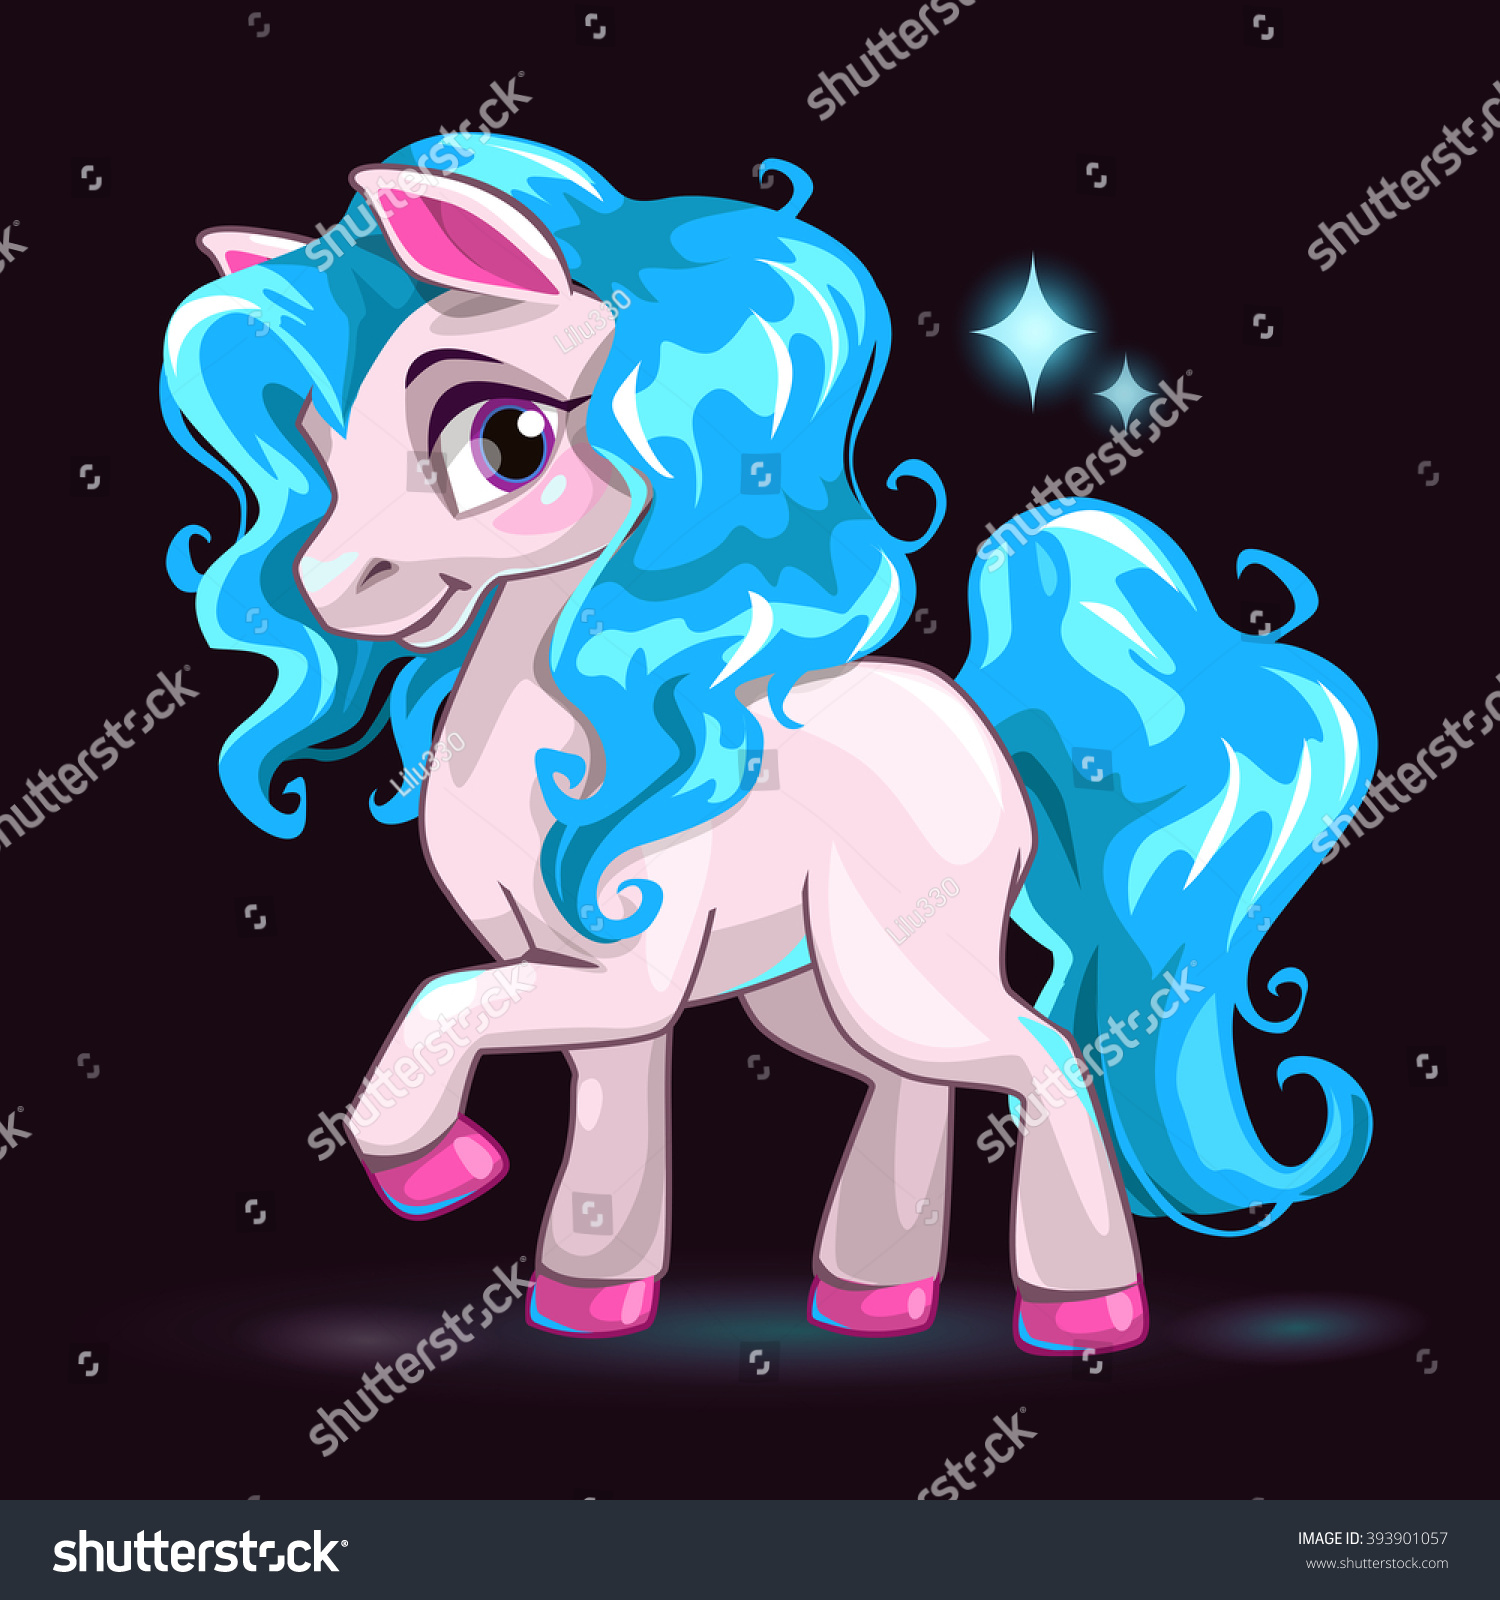 SVG of Little cute white cartoon horse with blue hair on dark background, beautiful baby pony princess, girlish vector illustration svg